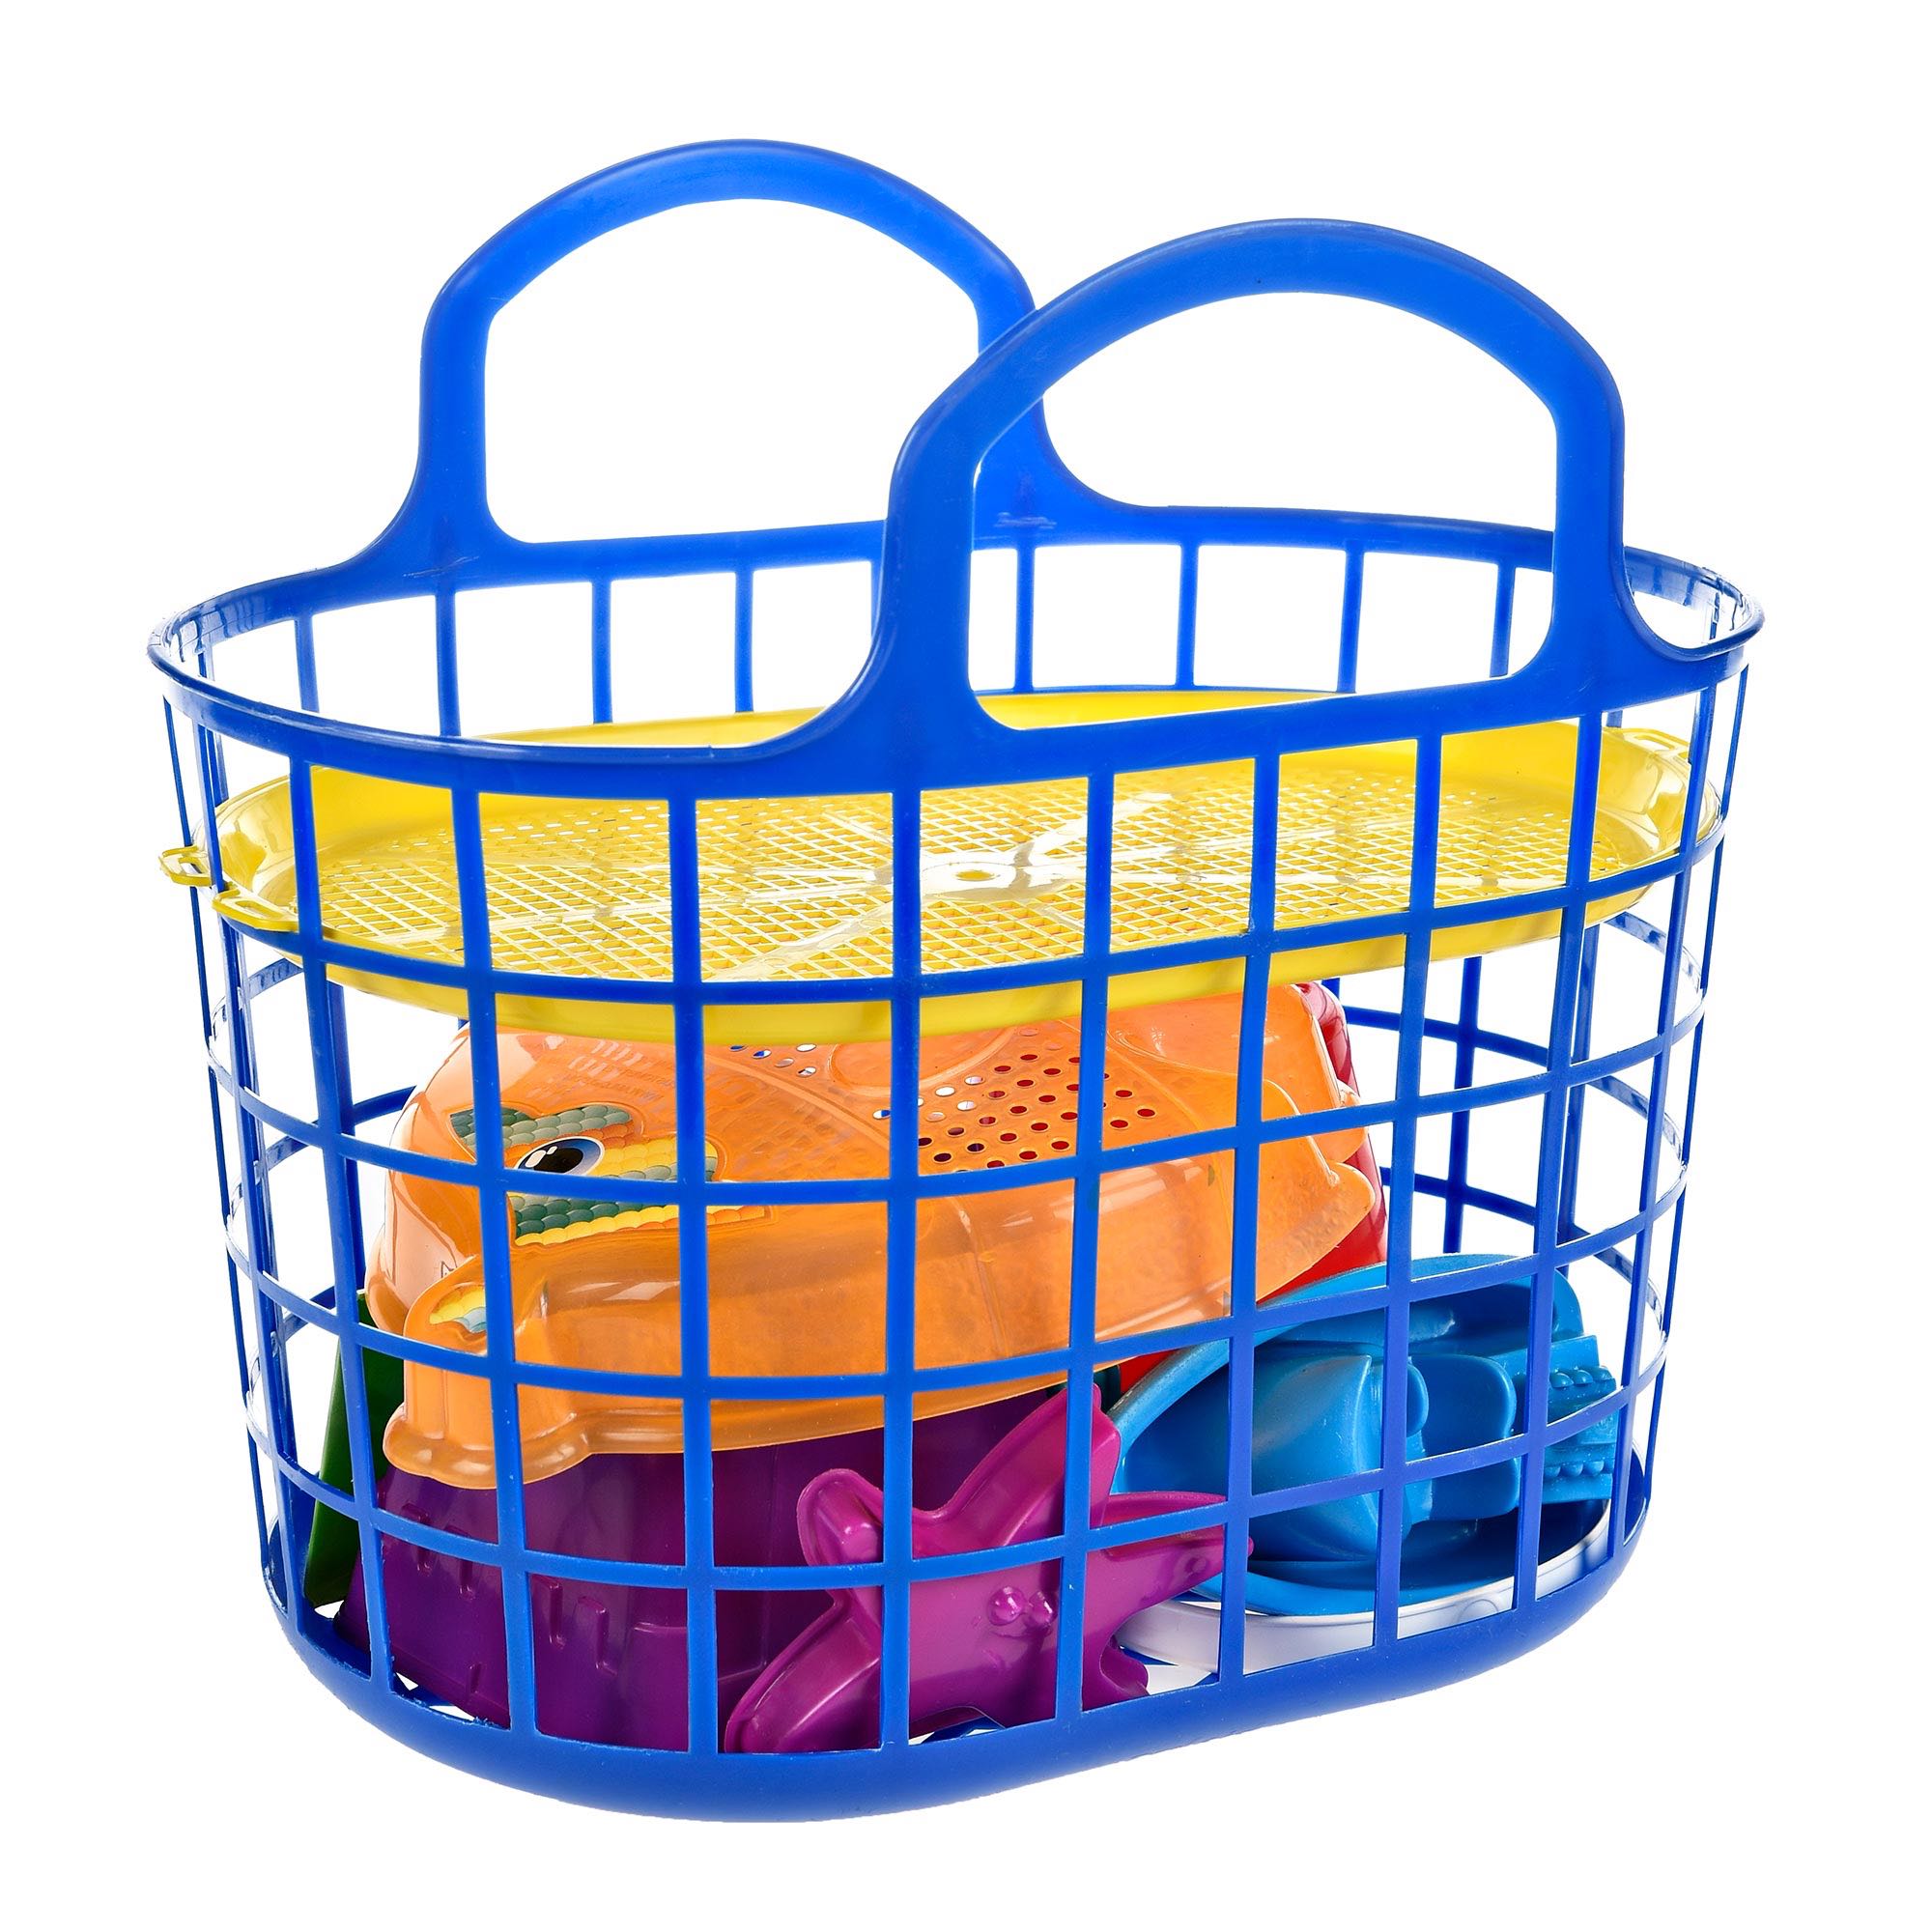 Play Day Beach Basket Set, 10 Pieces - image 1 of 19